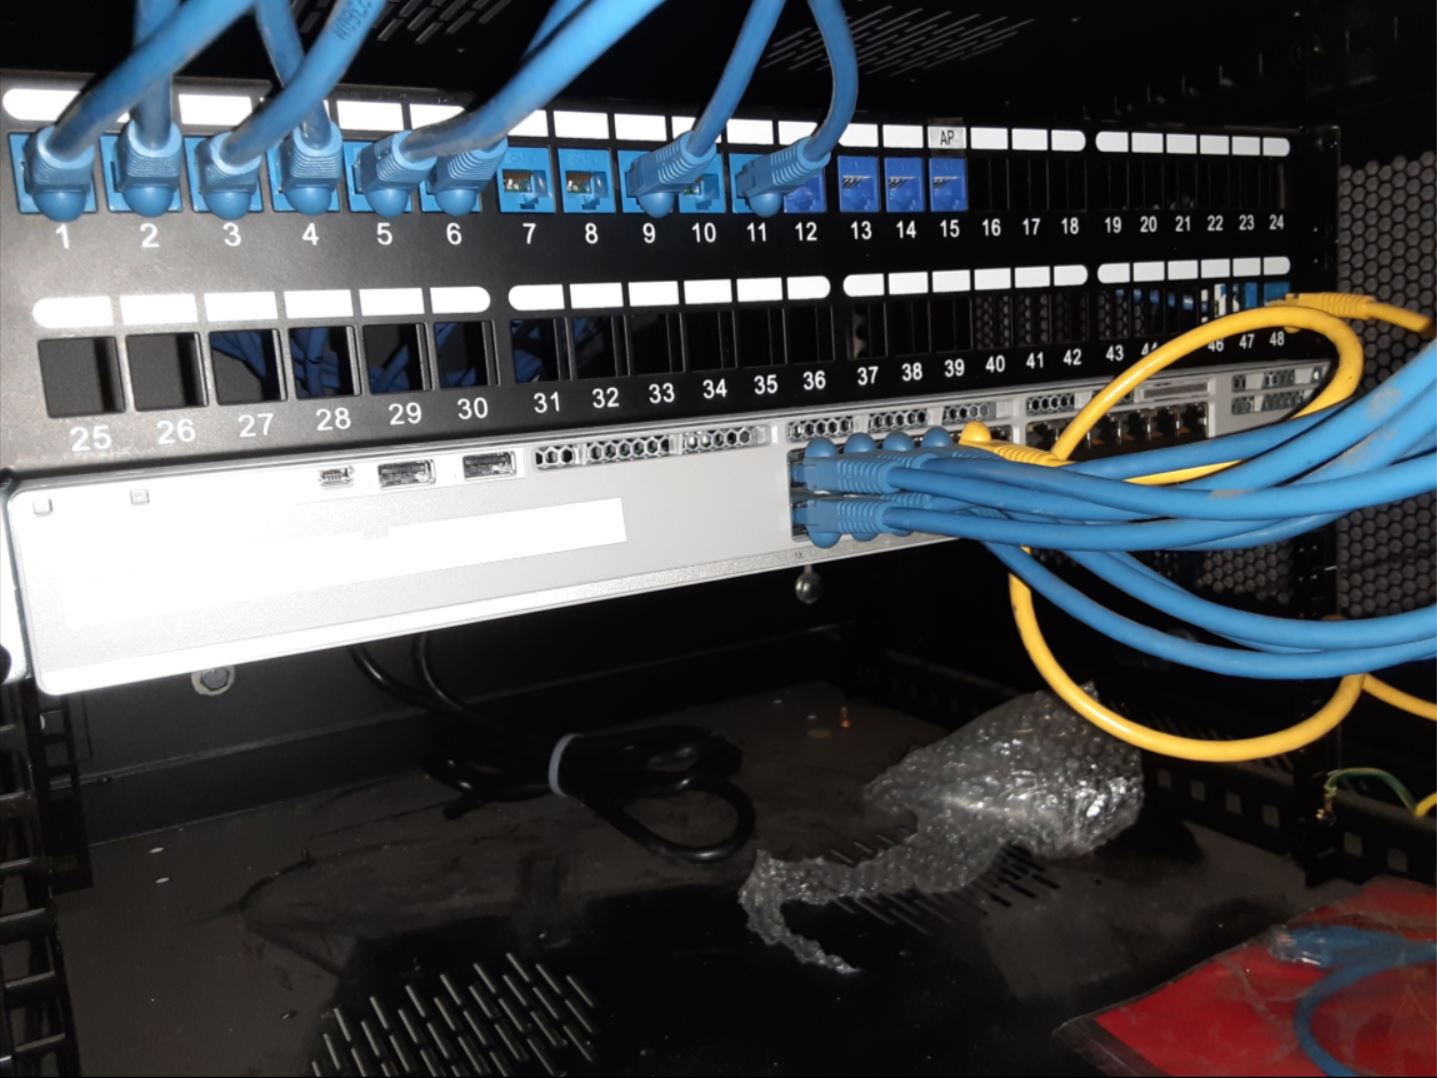 Patch panel and switch